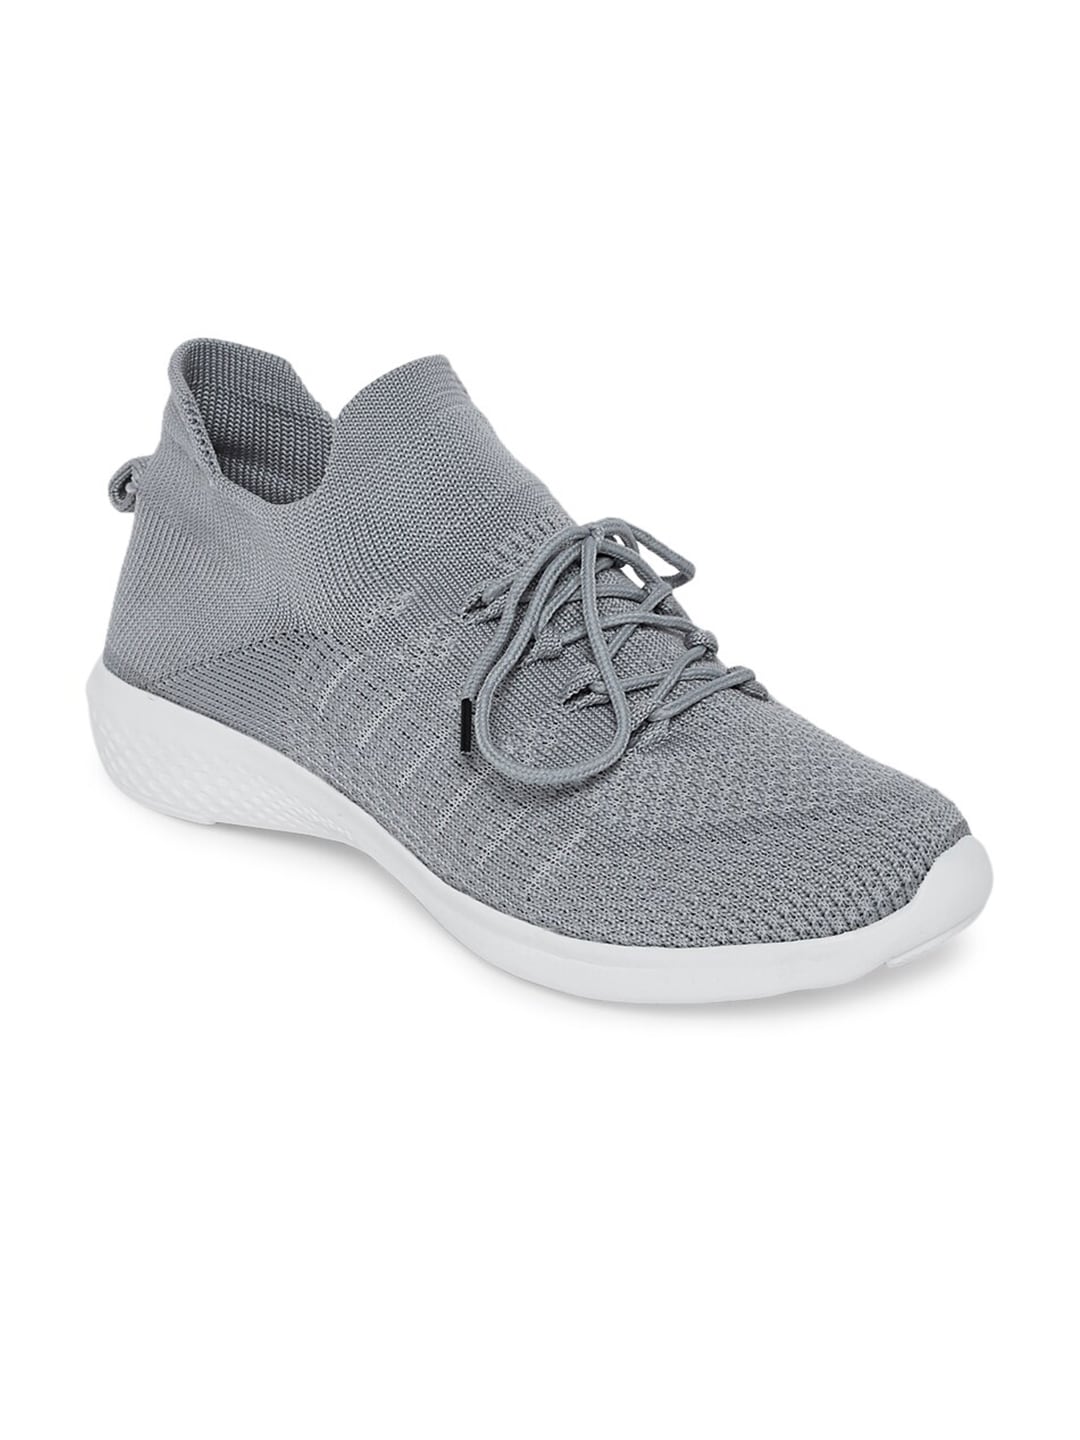 People Women Grey Textile Walking Non-Marking Shoes Price in India